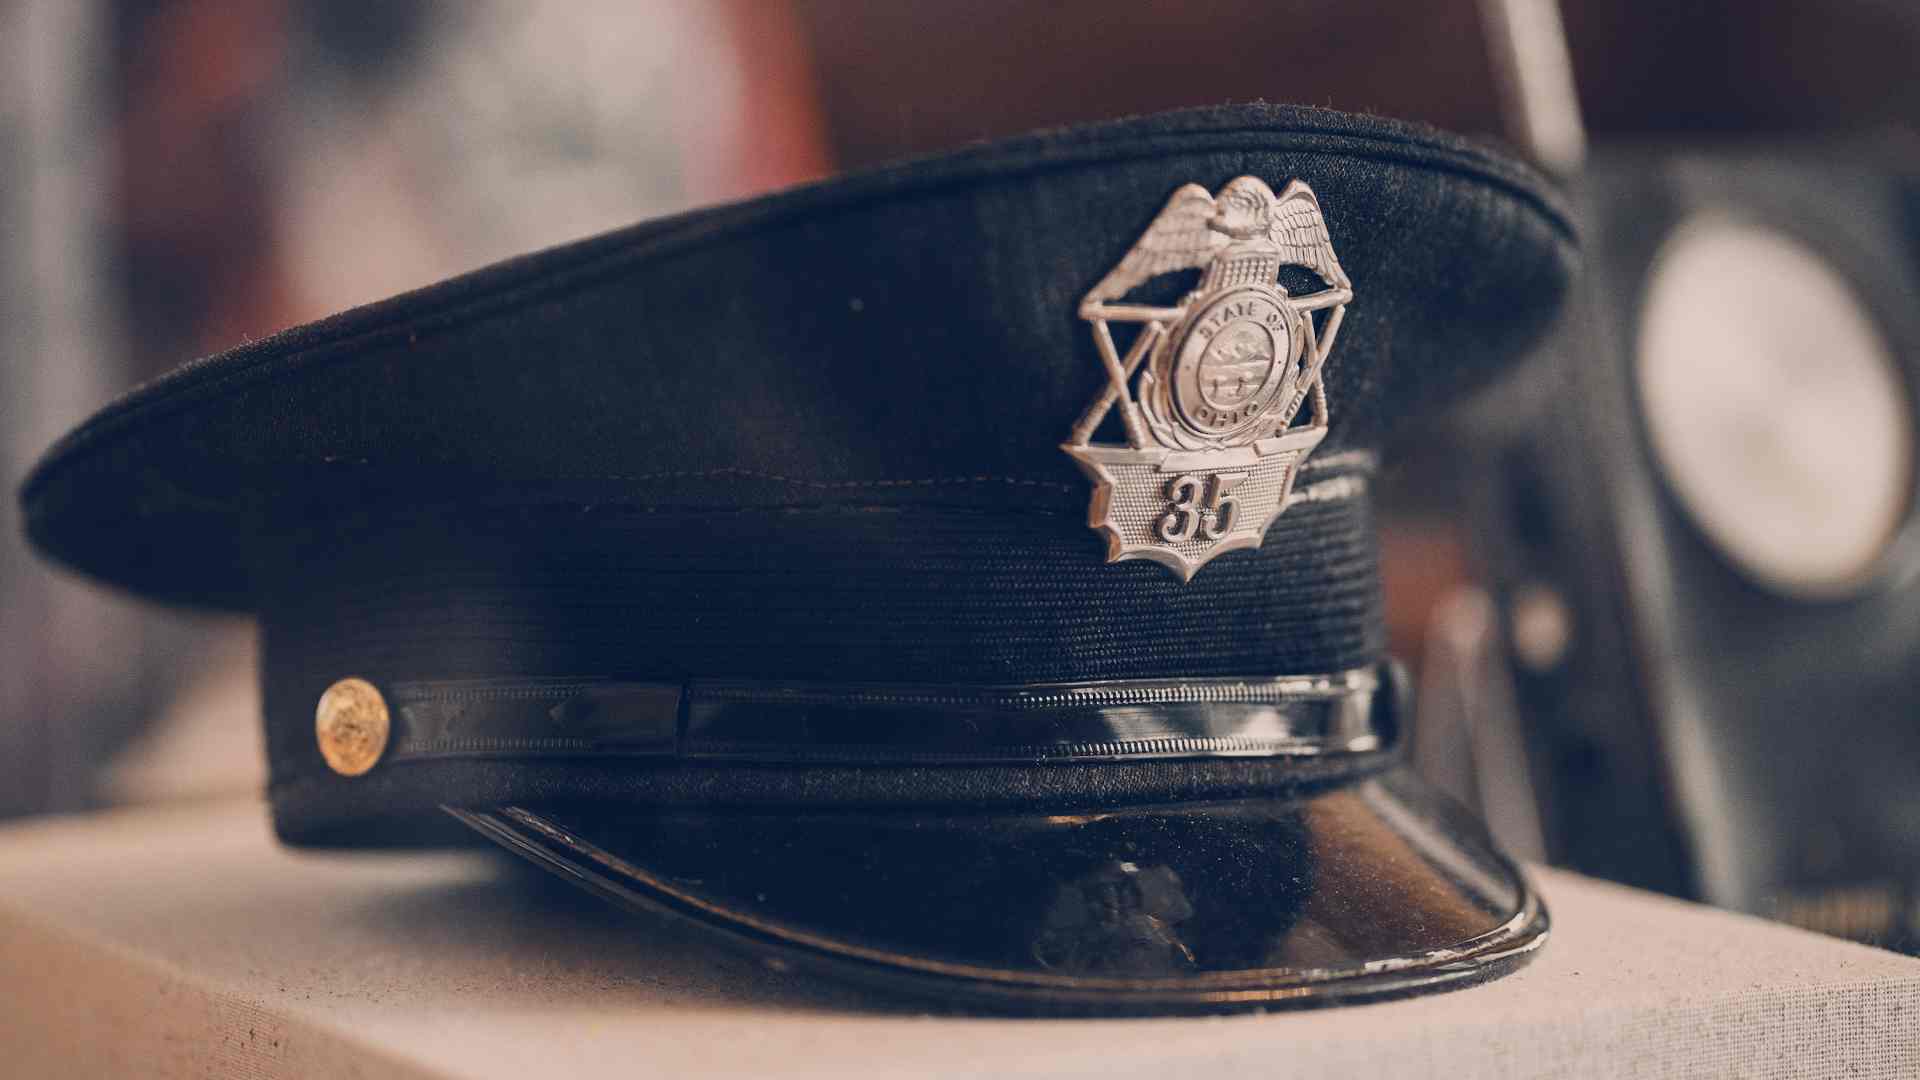 How to Overcome the Police Retention and Recruitment Struggle